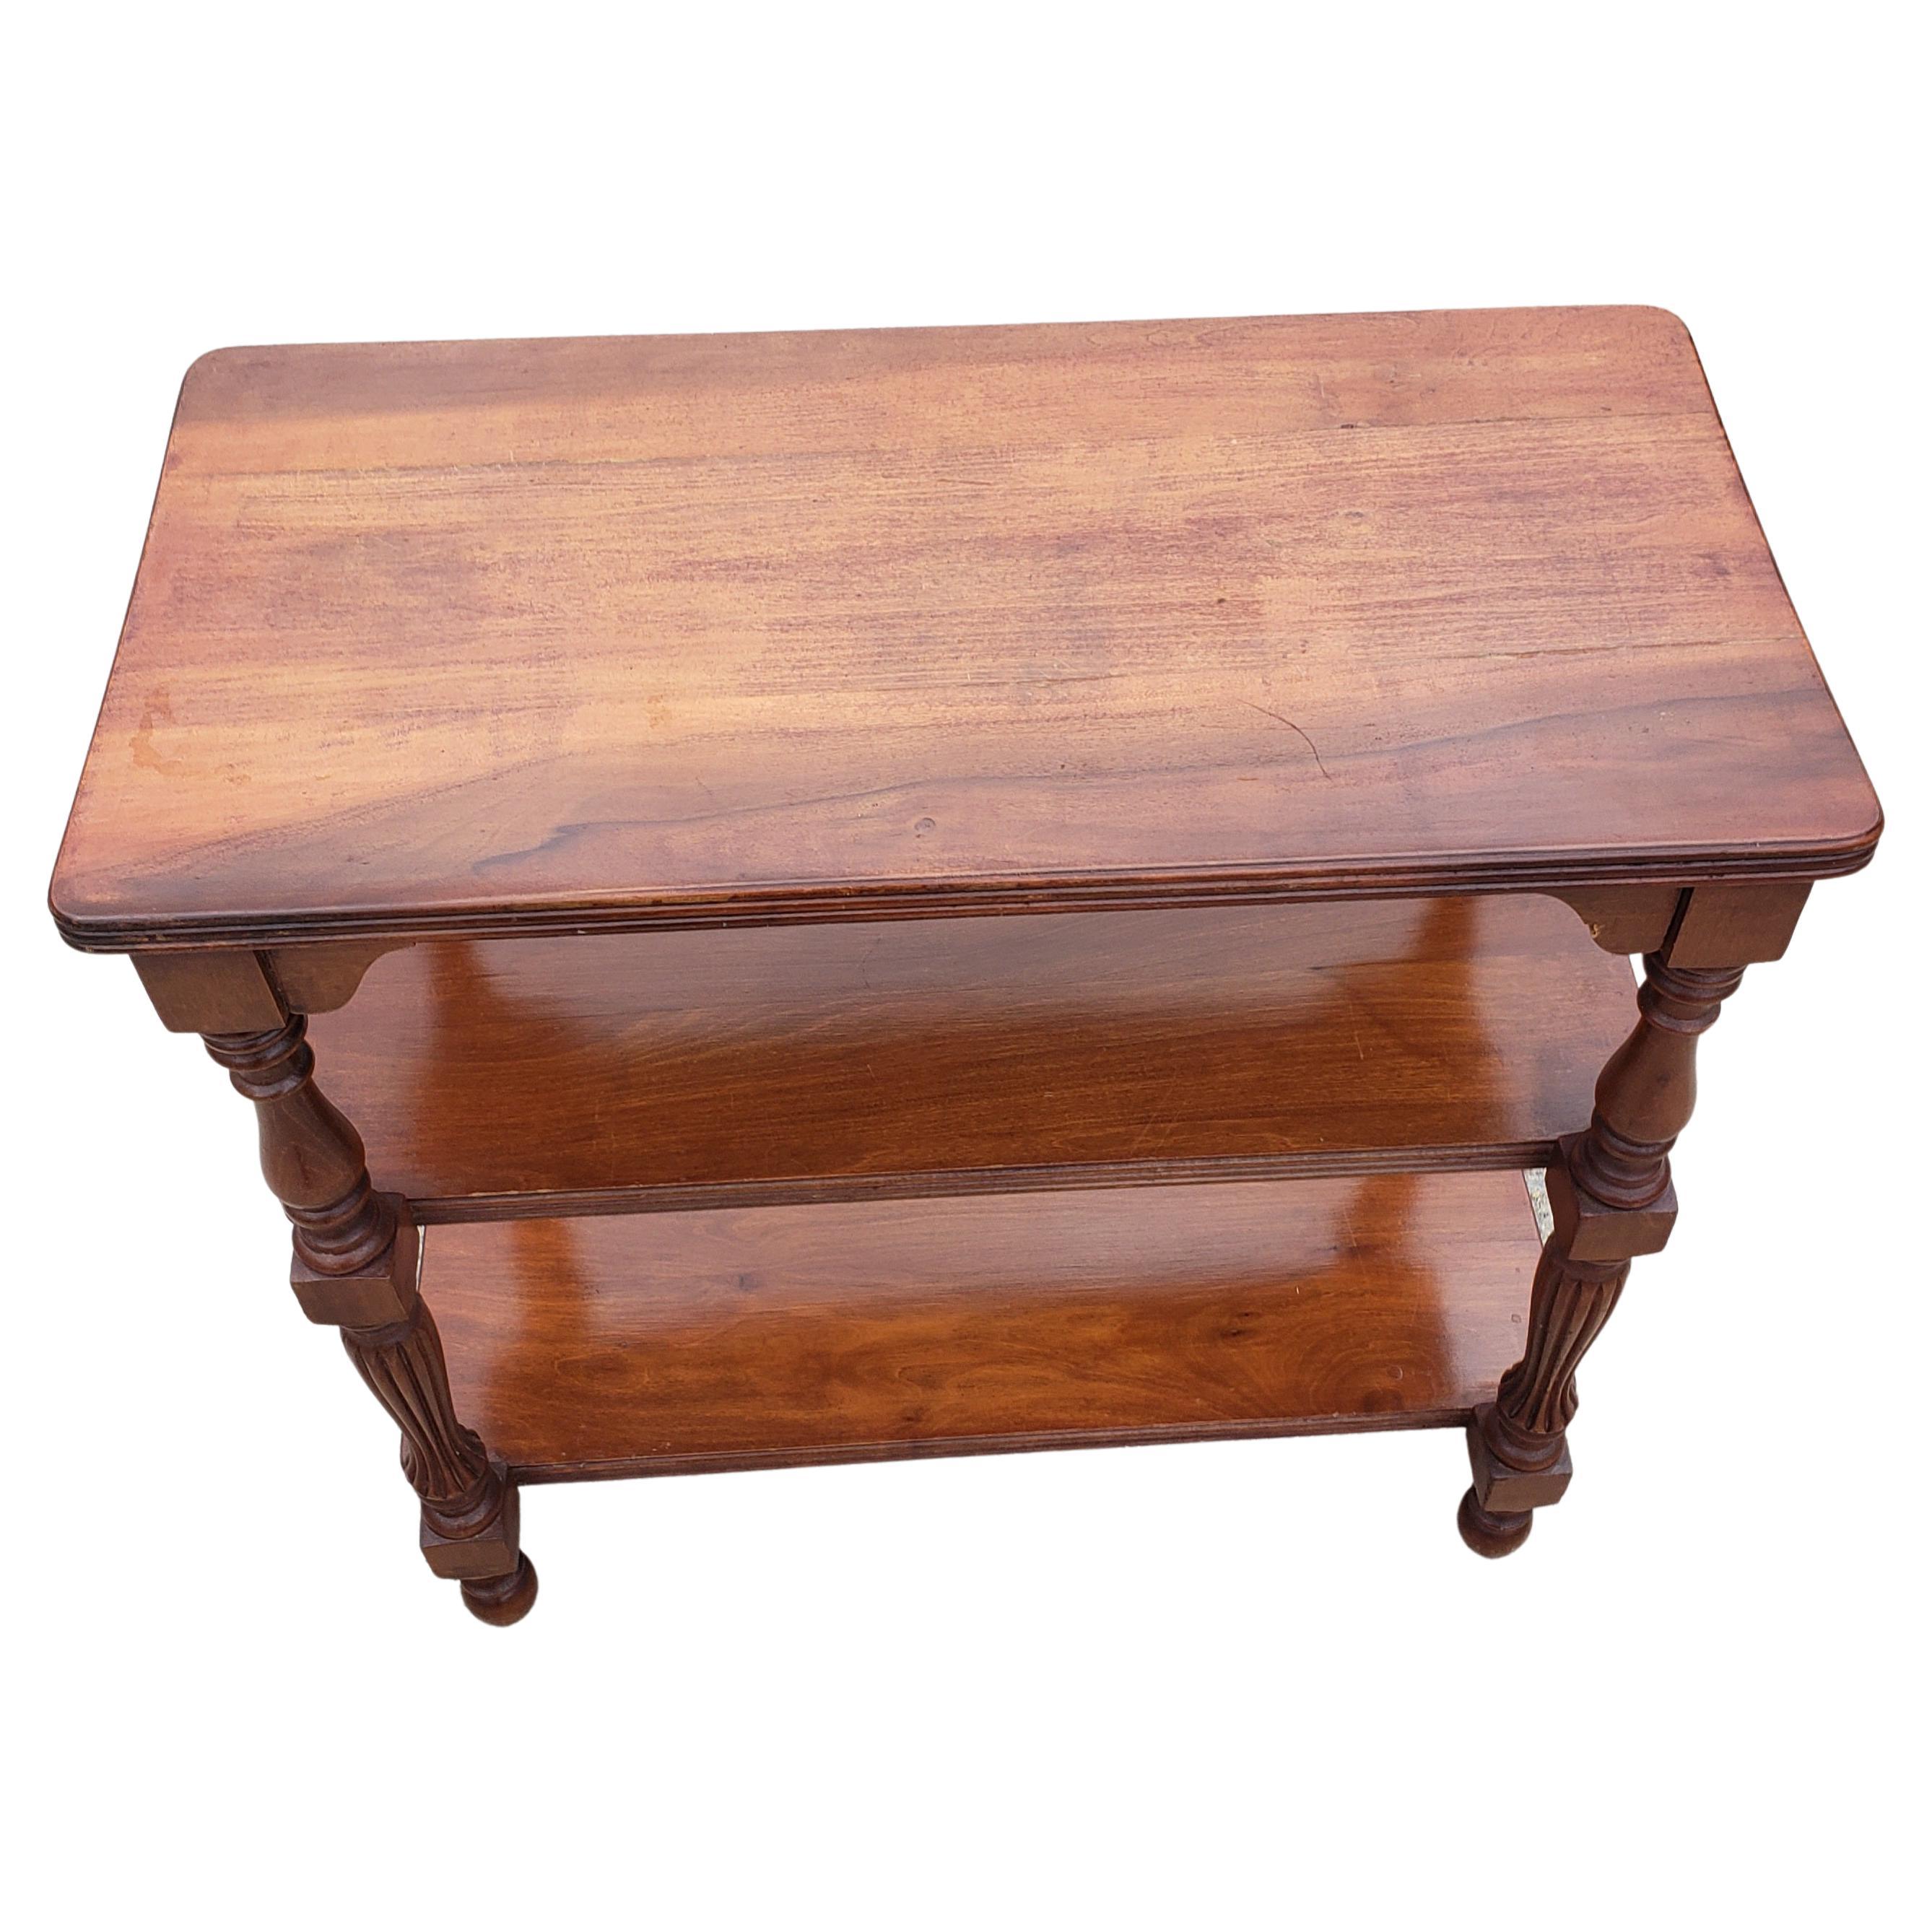 Classical American 3 tier mahogany side table. First tier 4